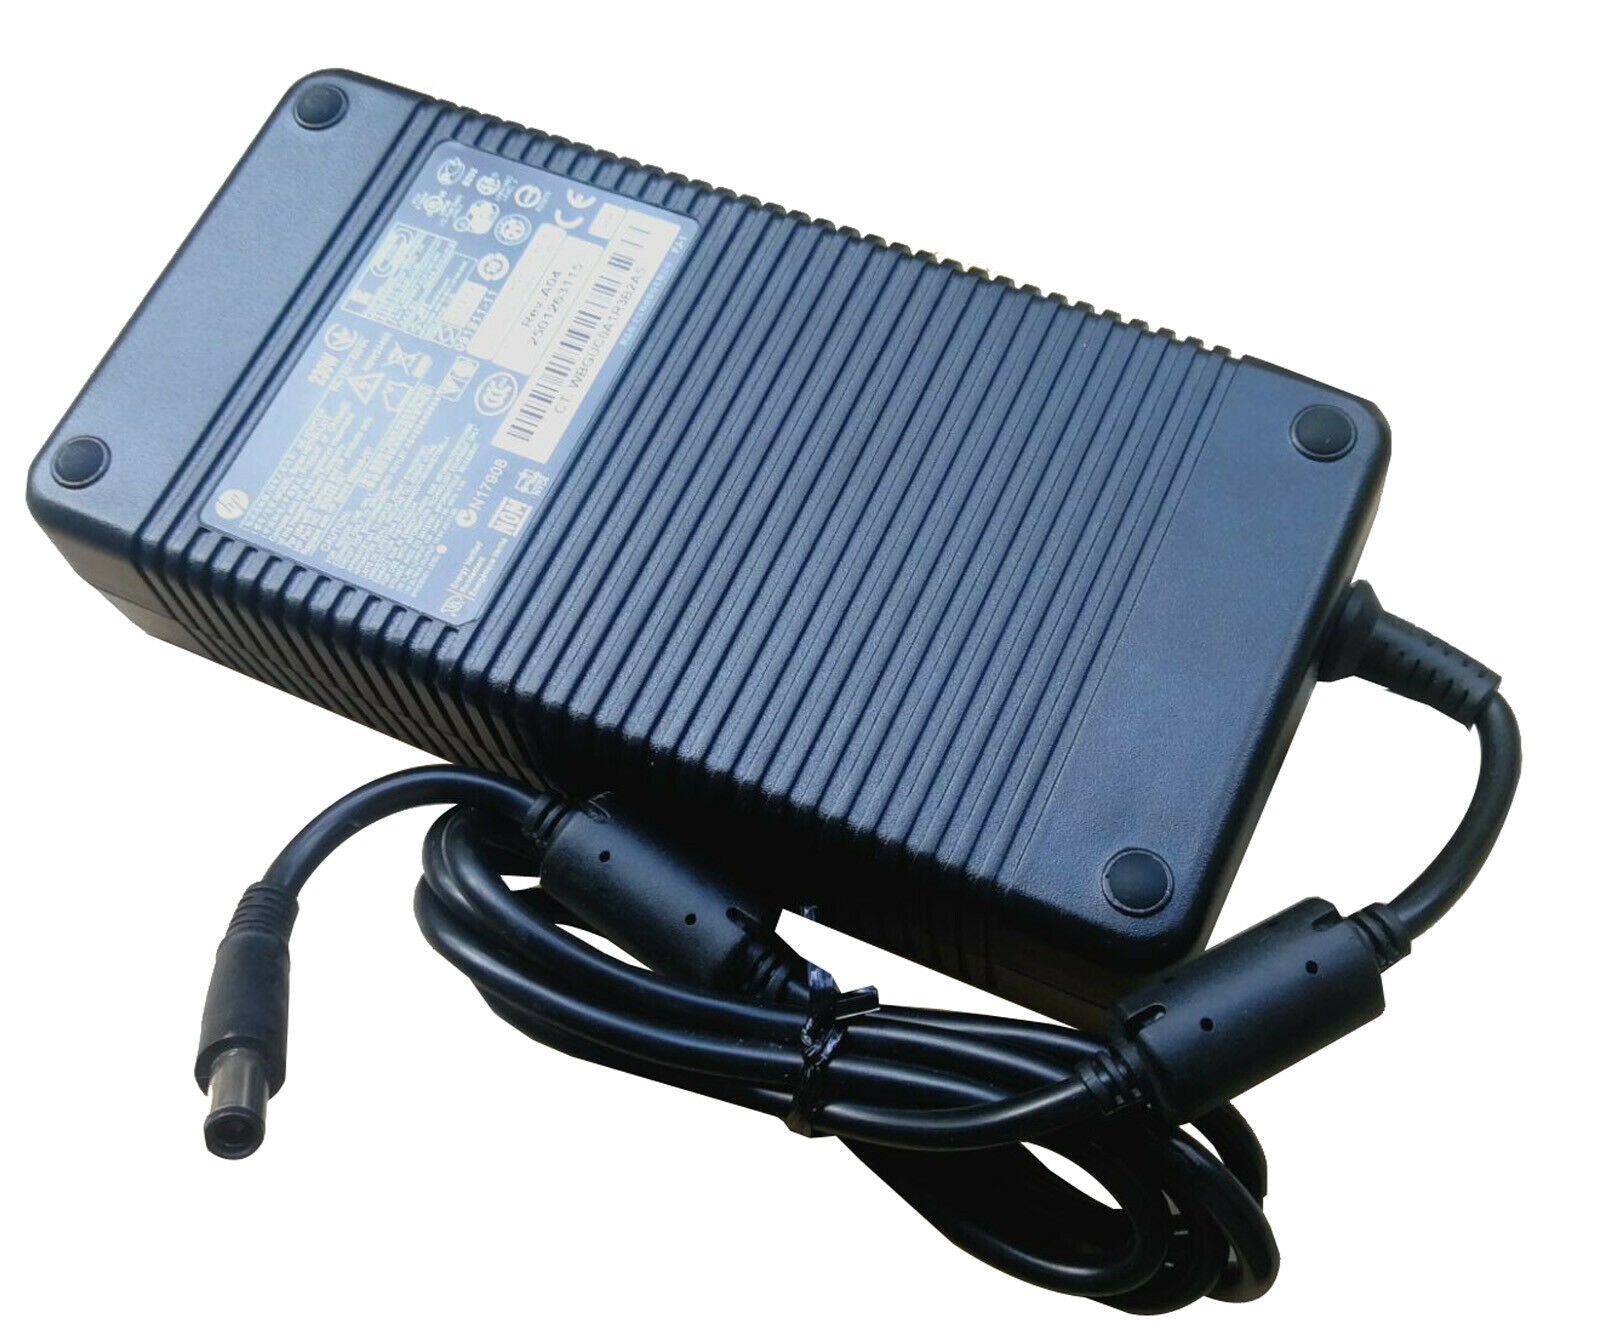 NEW Genuine 19.5V 11.8A 230W AC Adapter Charger For HP Elitebook 8540W 8560W 8770W 8760W